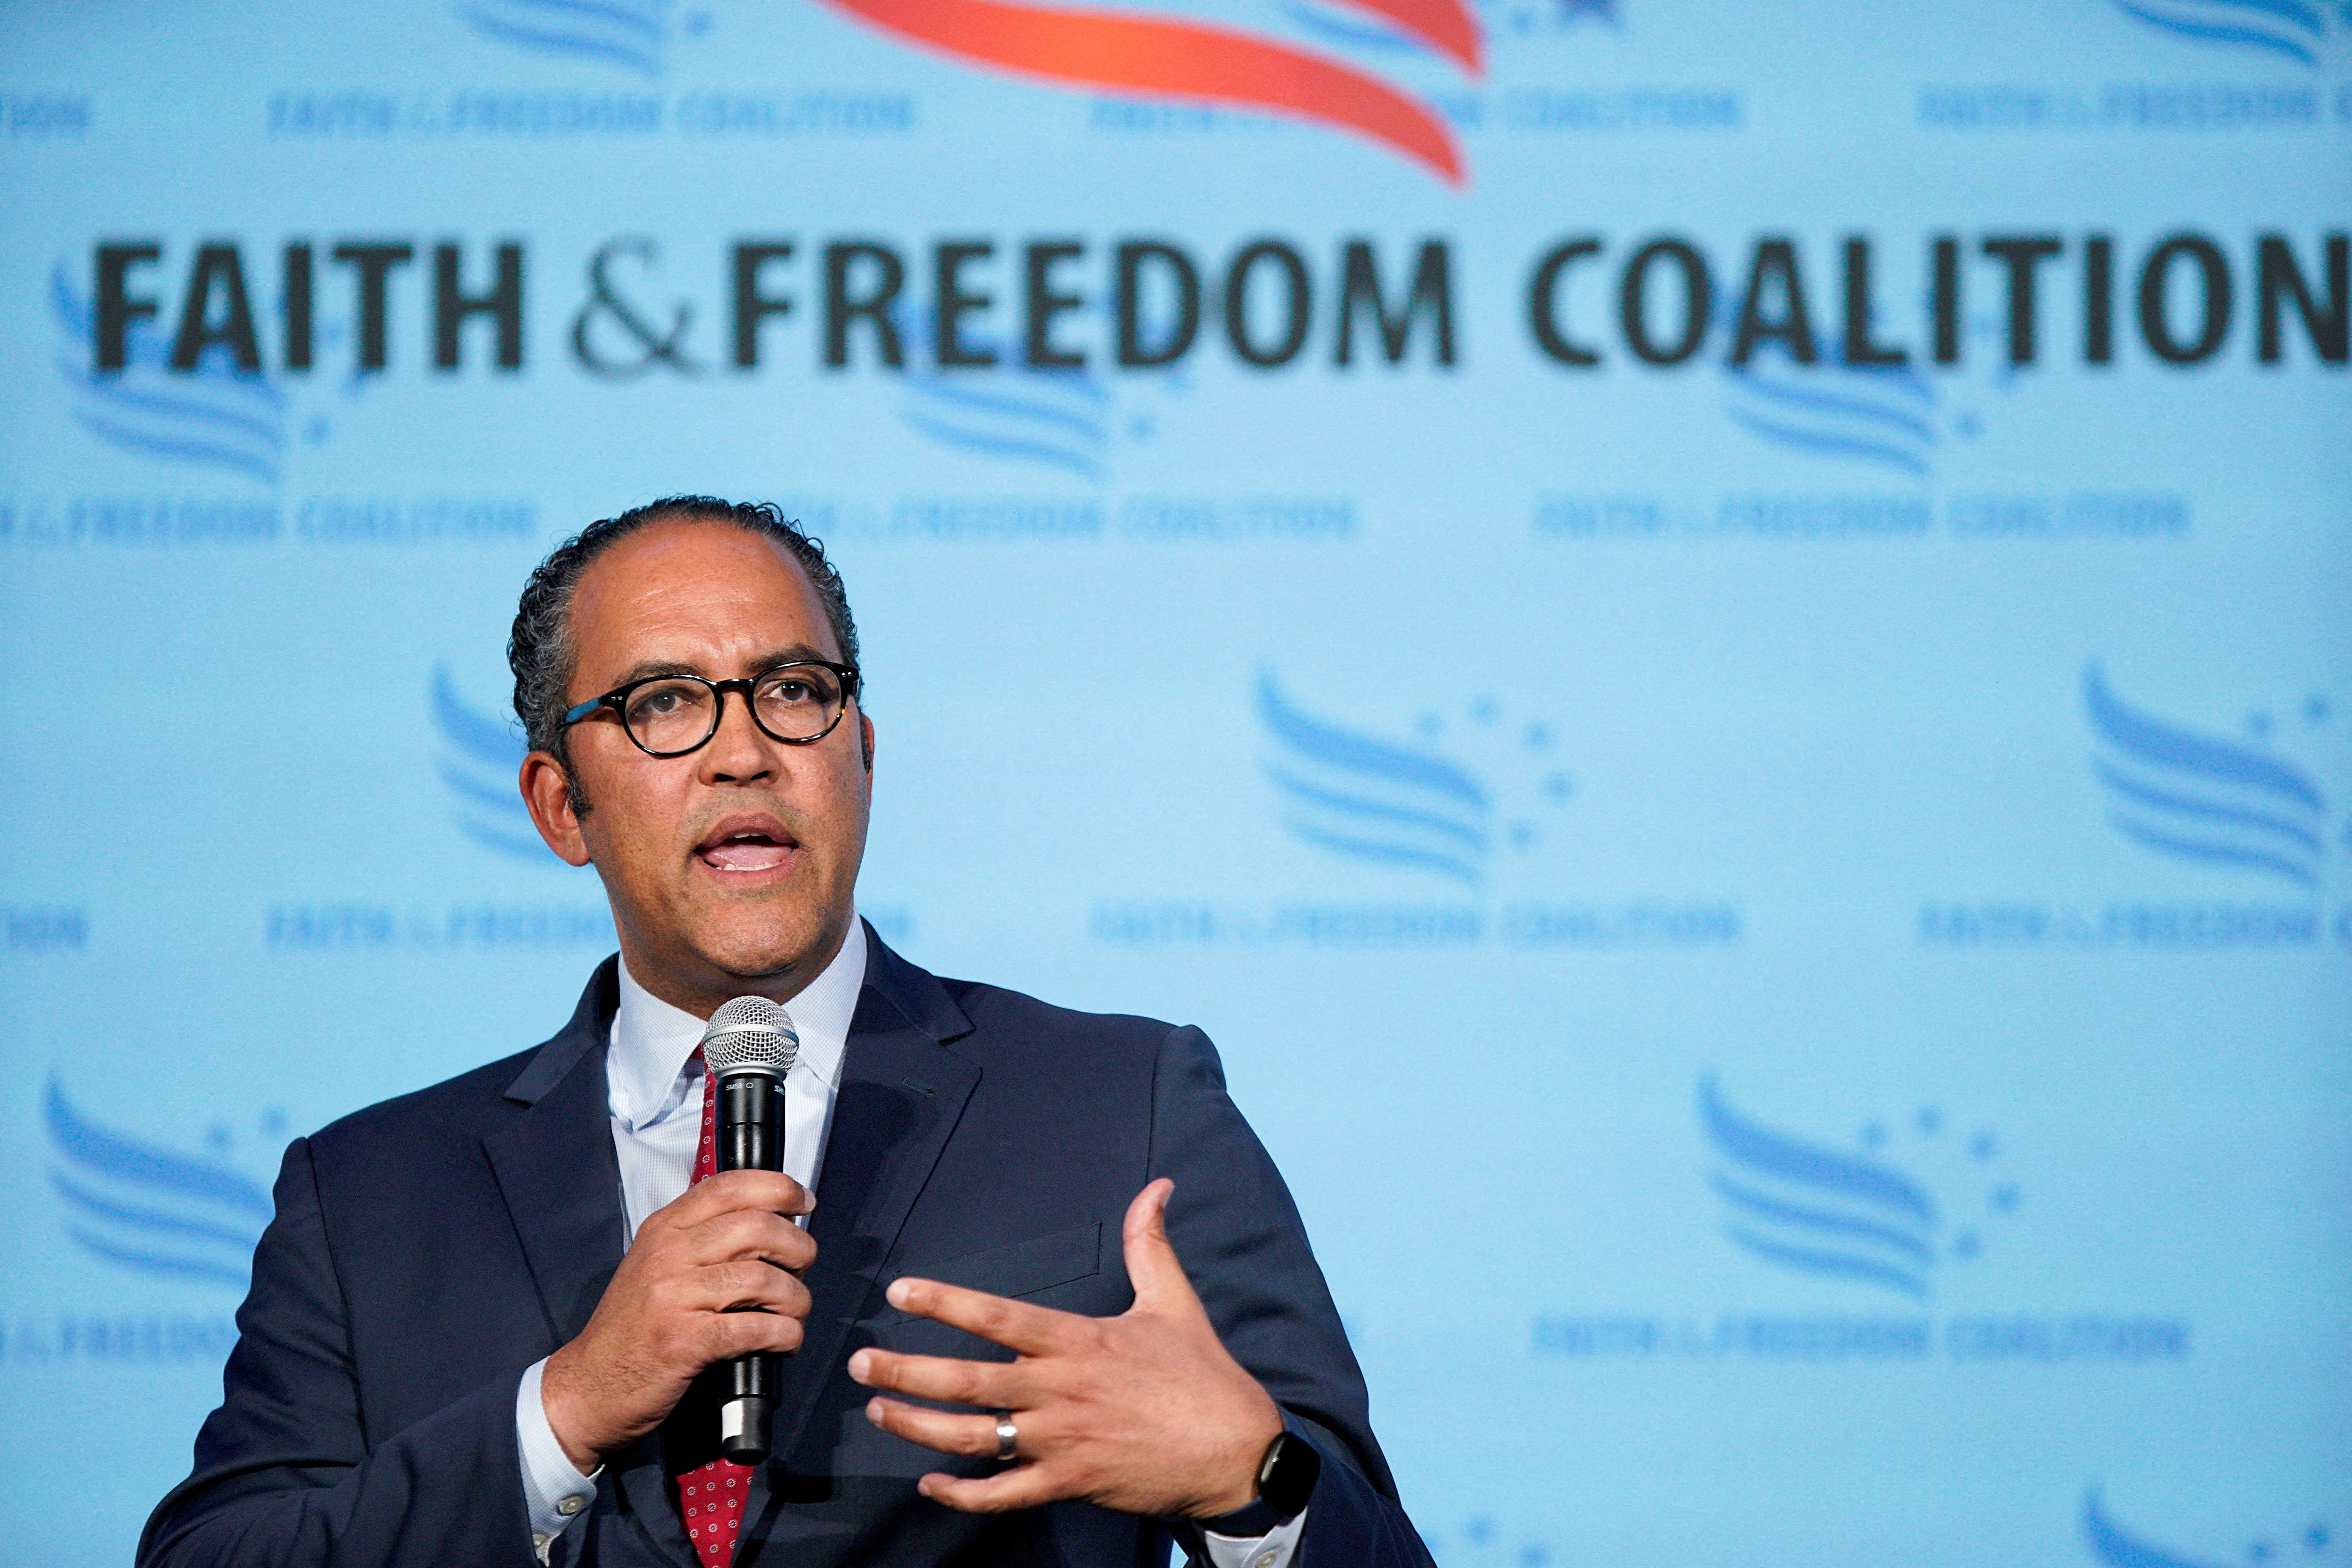 Will Hurd was the moderate alternative to Trump